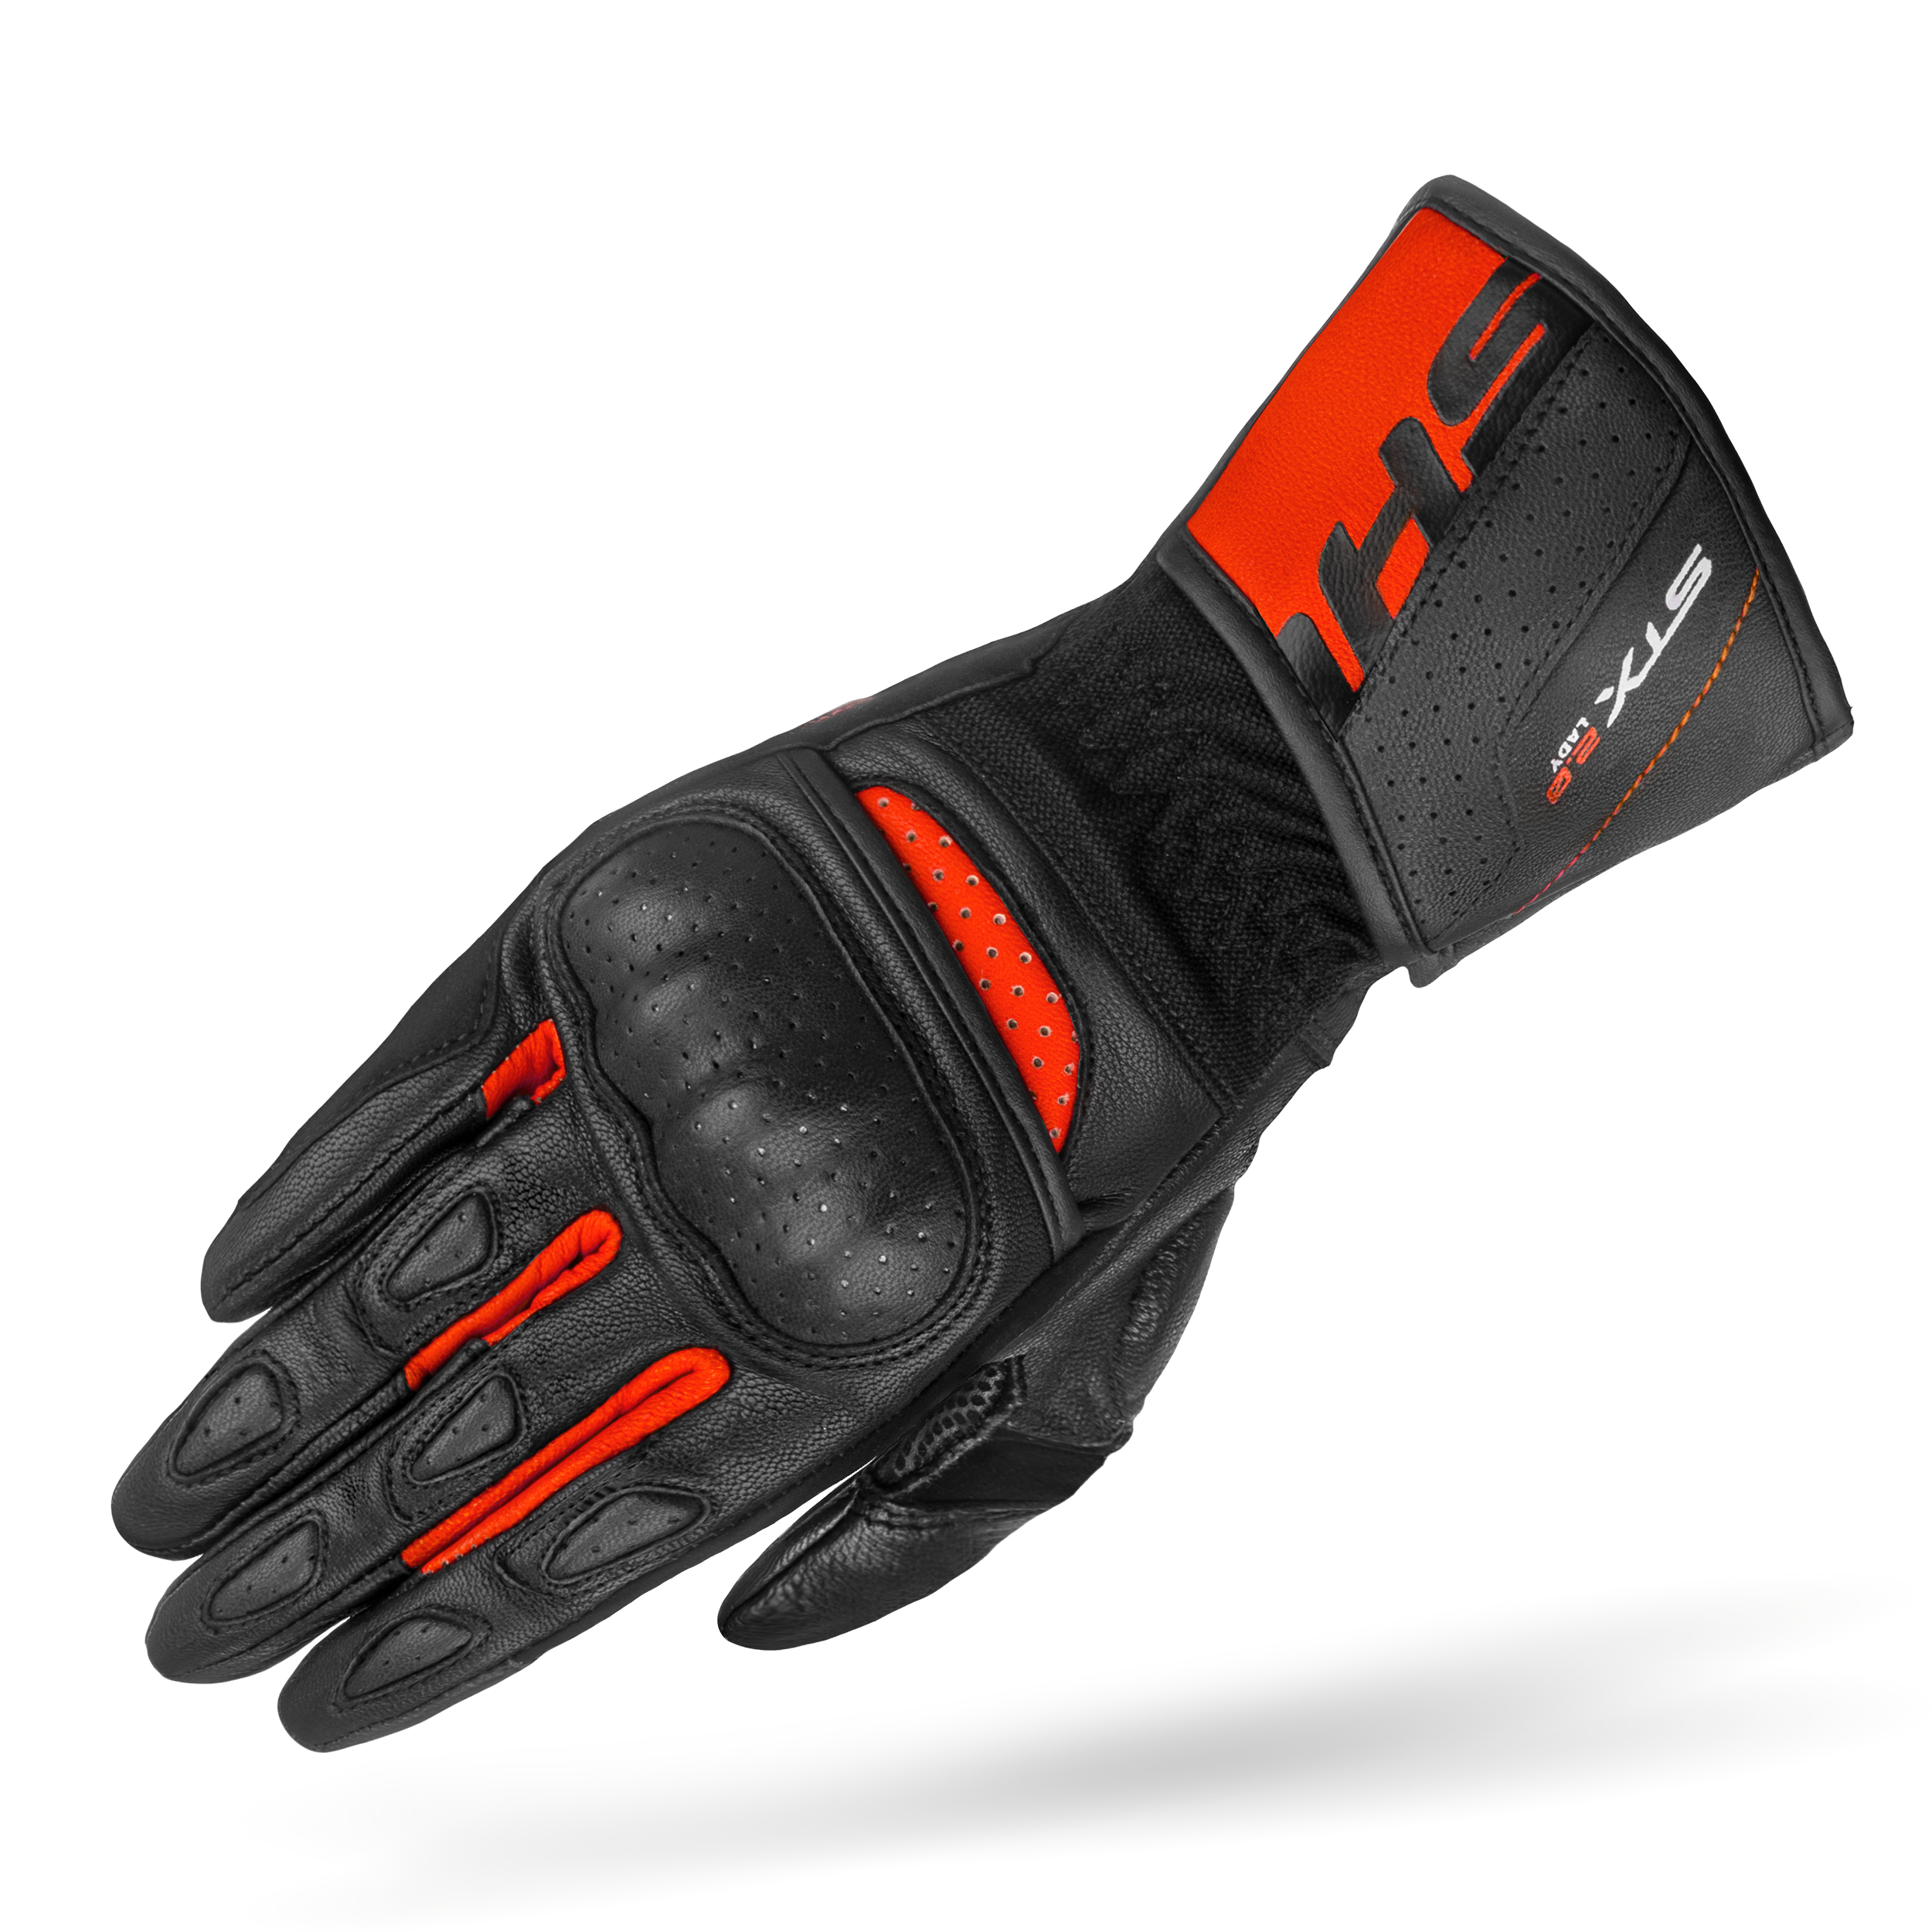 Black and RED women's leather motorcycle glove STX from SHIMA